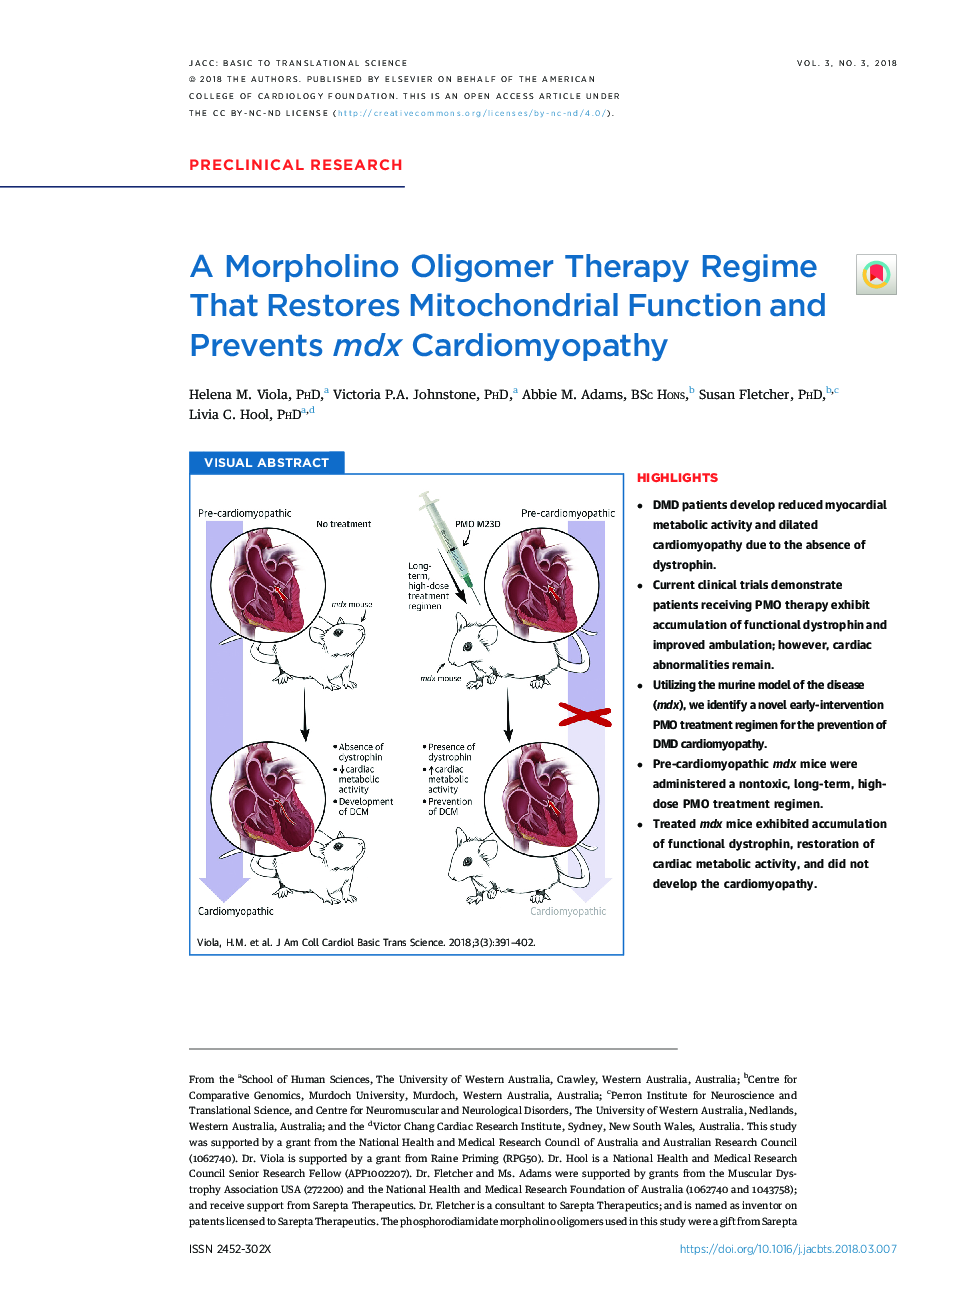 A Morpholino Oligomer Therapy Regime That Restores Mitochondrial Function and Prevents mdx Cardiomyopathy